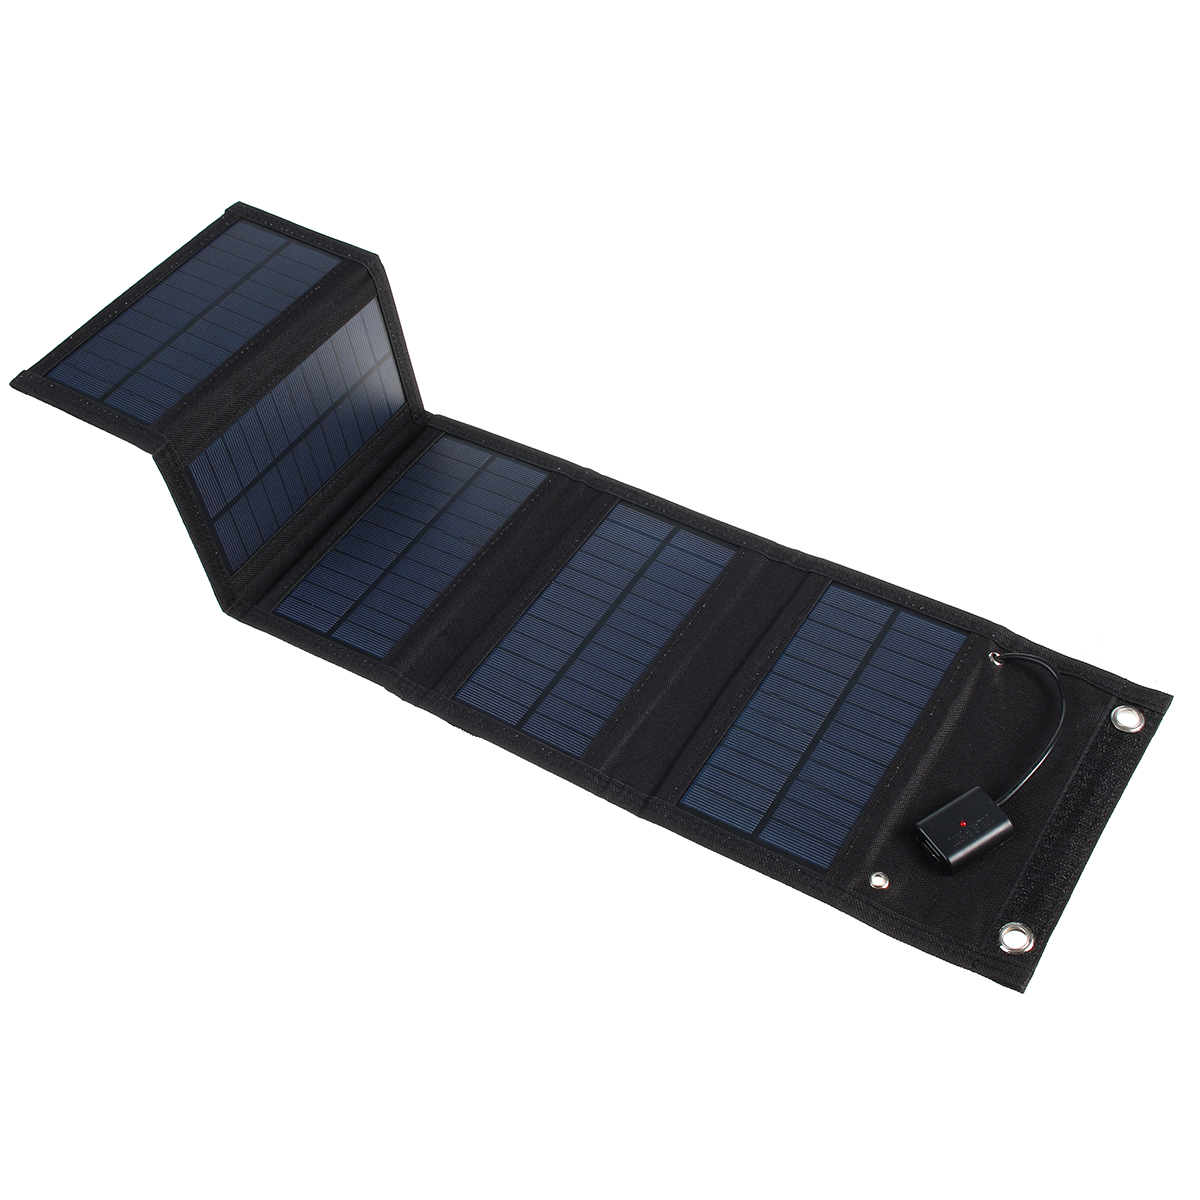 80W-Foldable-USB-Solar-Panel-Portable-Folding-Waterproof-Solar-Panel-Charger-Outdoor-Mobile-Power-Ba-1806137-7